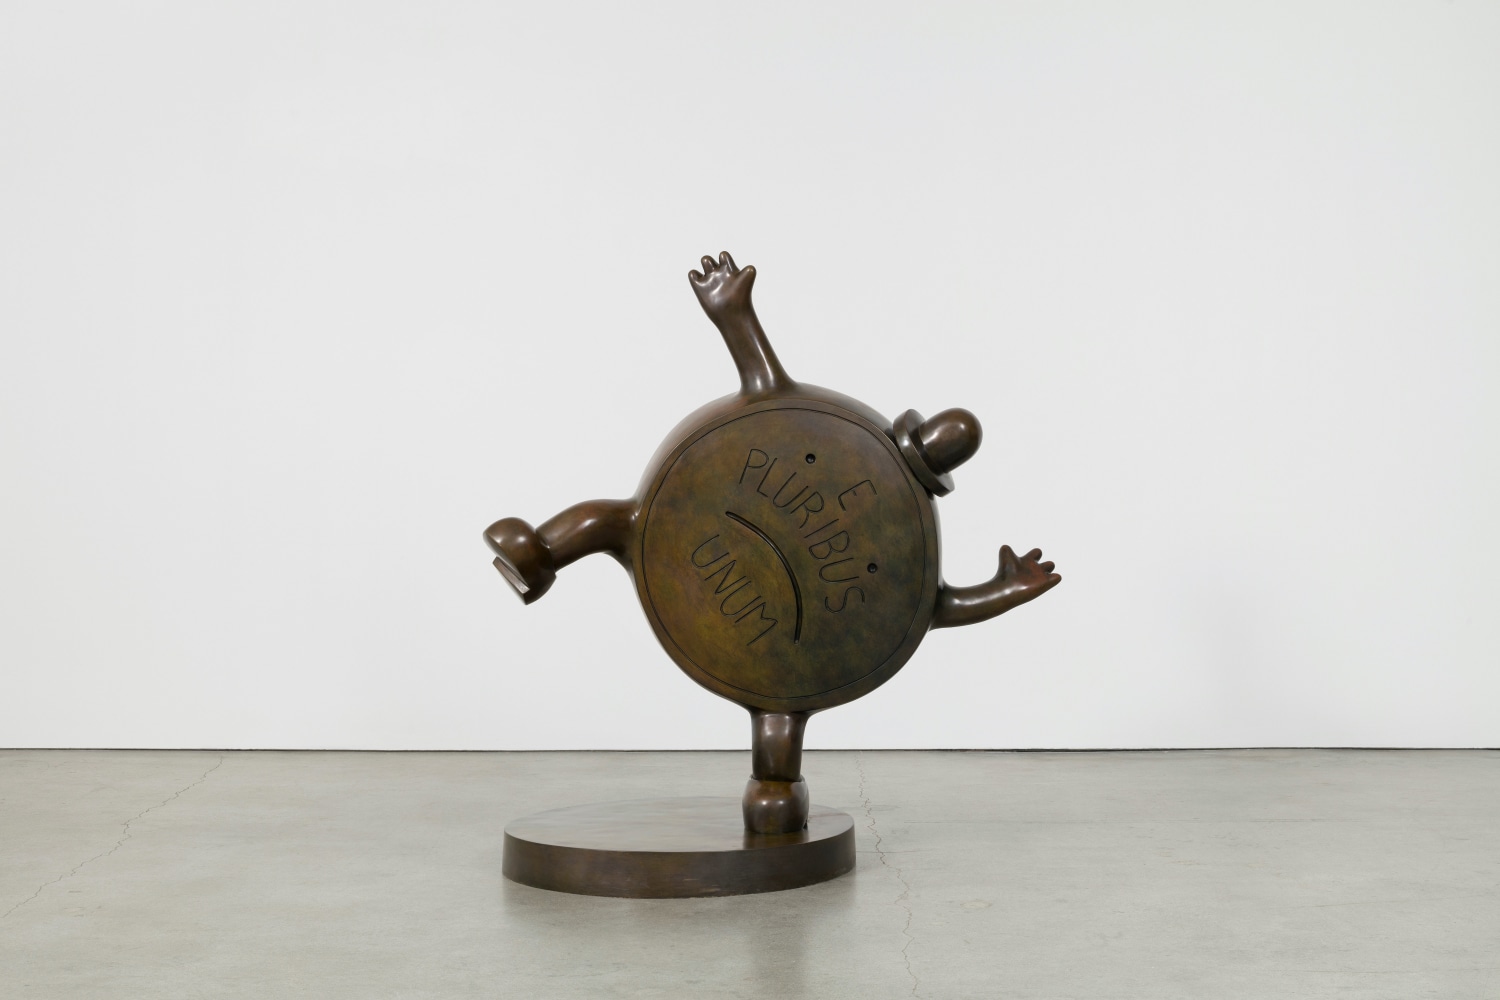 Bronze sculpture of a personified penny coin with top hat by Tom Otterness.